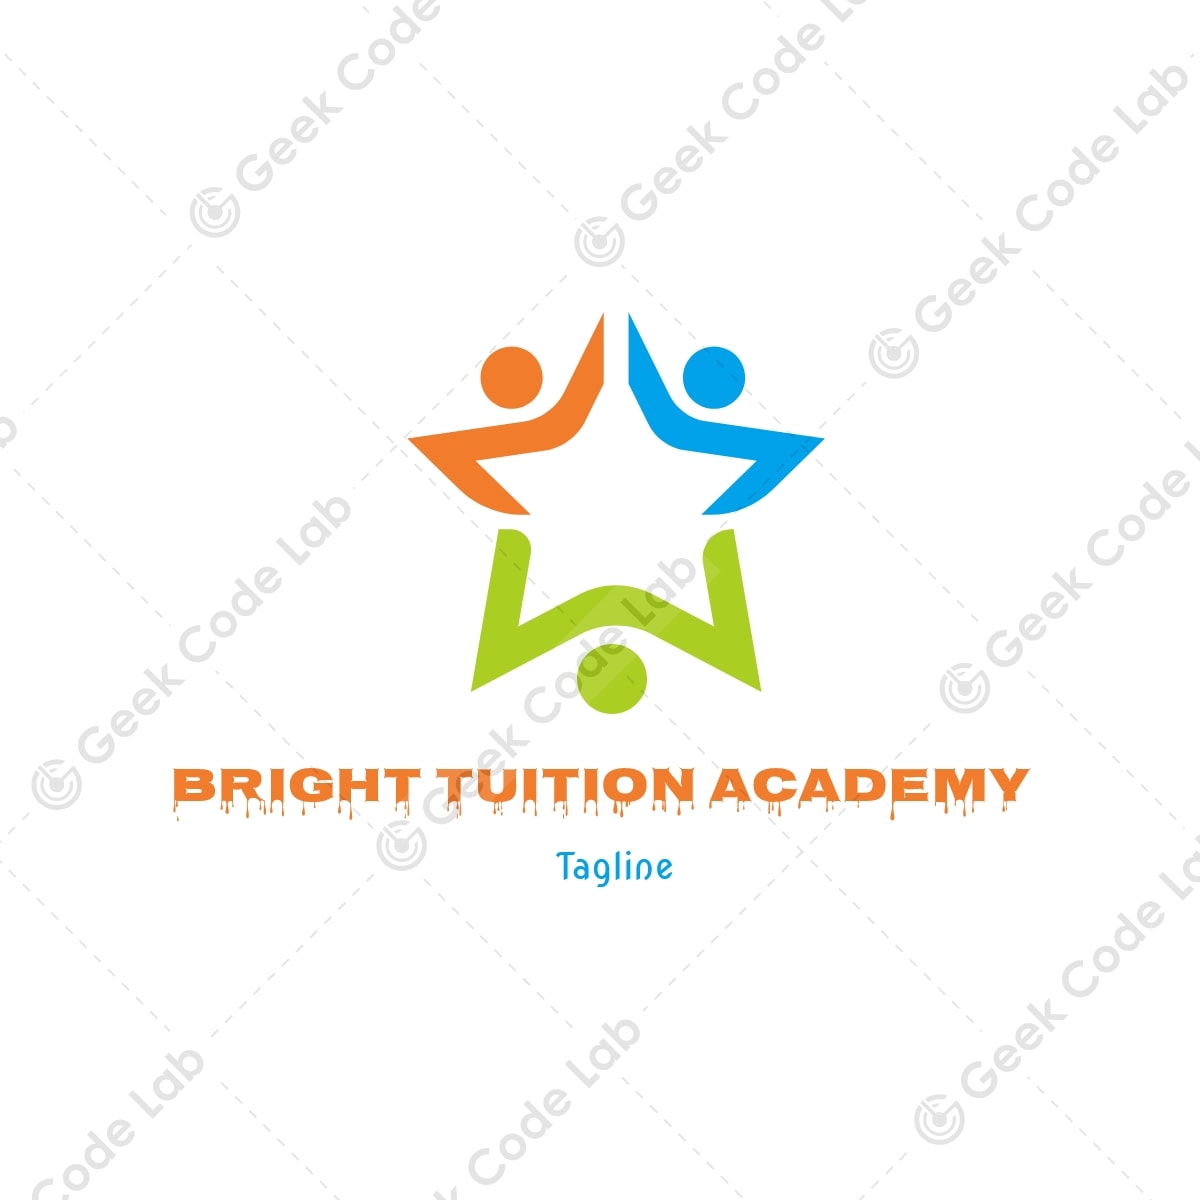 Bright Tuition Academy